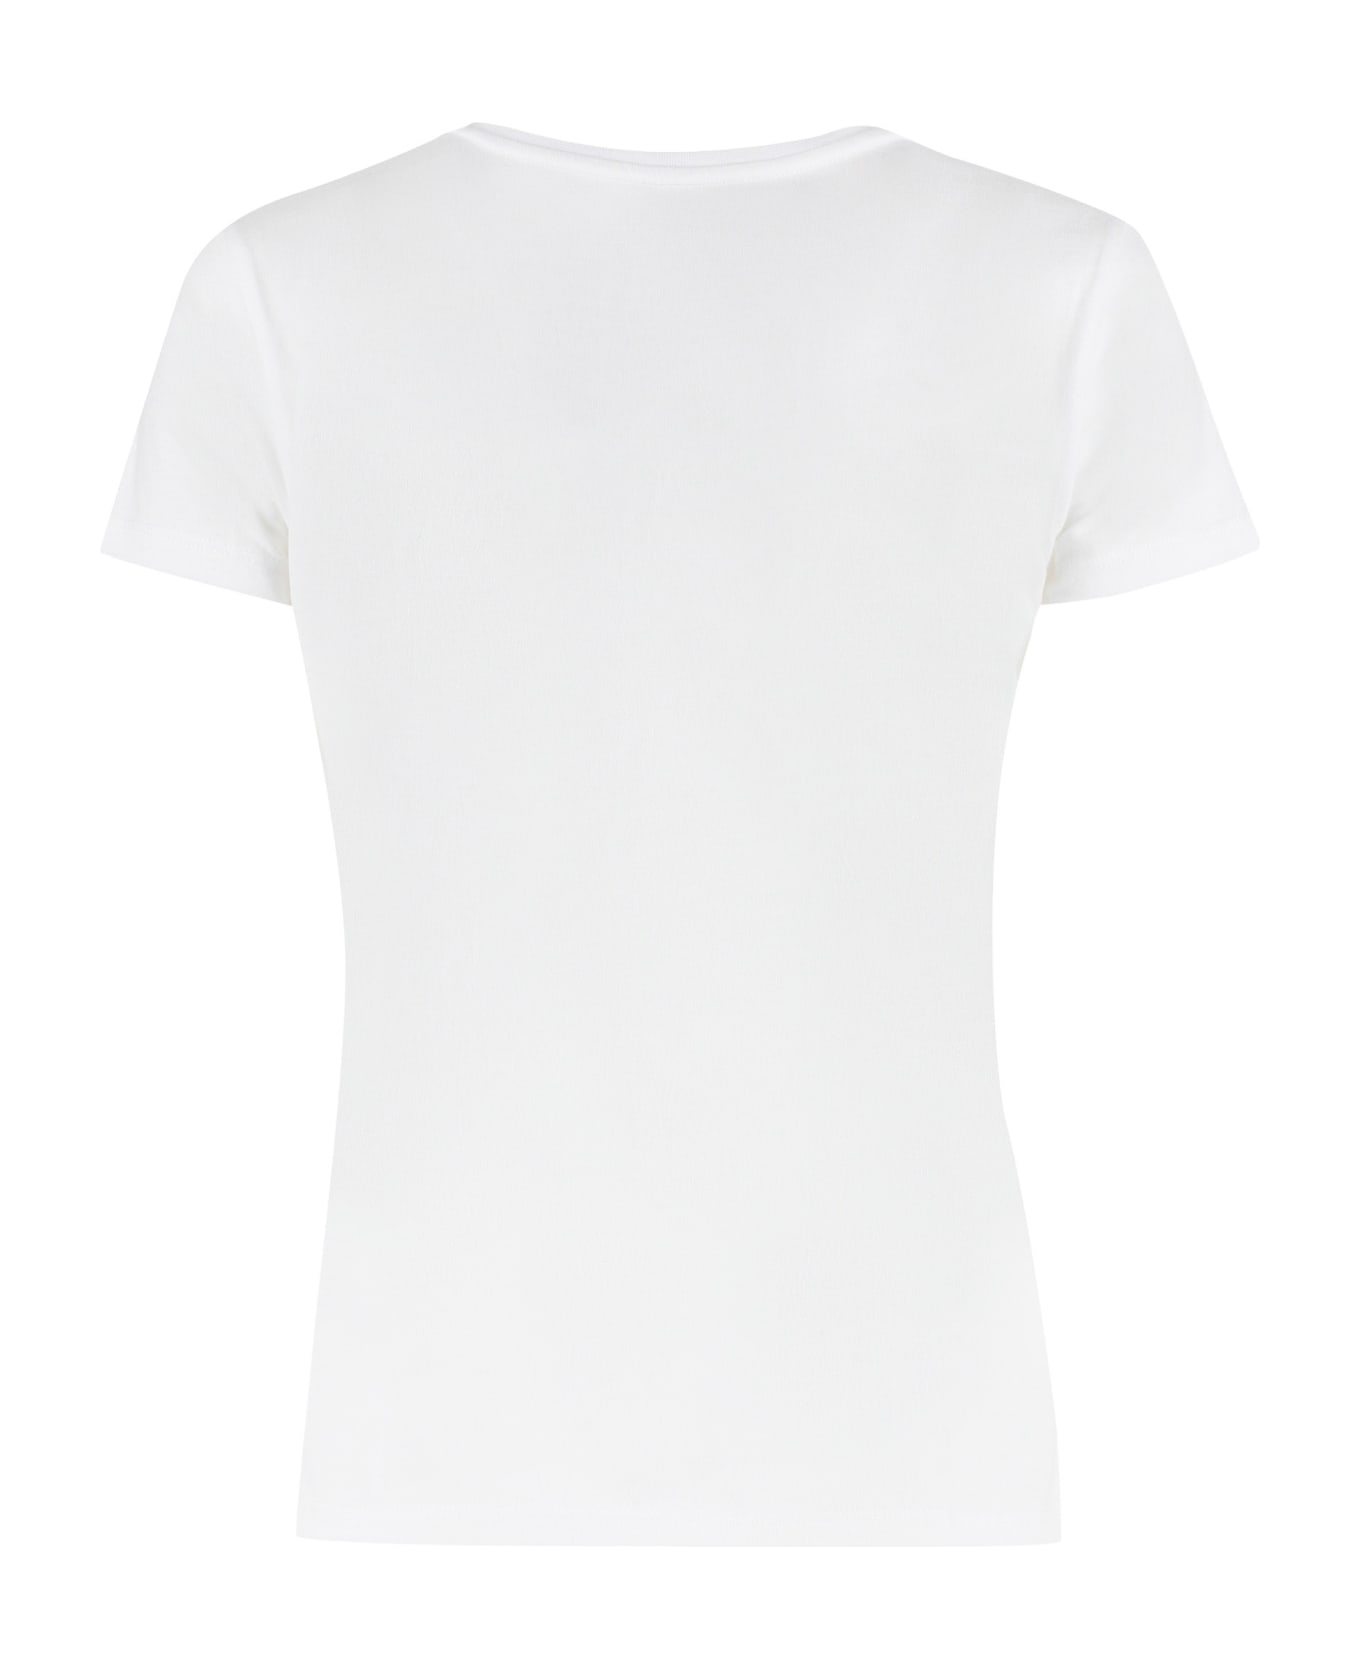 Majestic Filatures Printed Cotton T-shirt - White Tシャツ